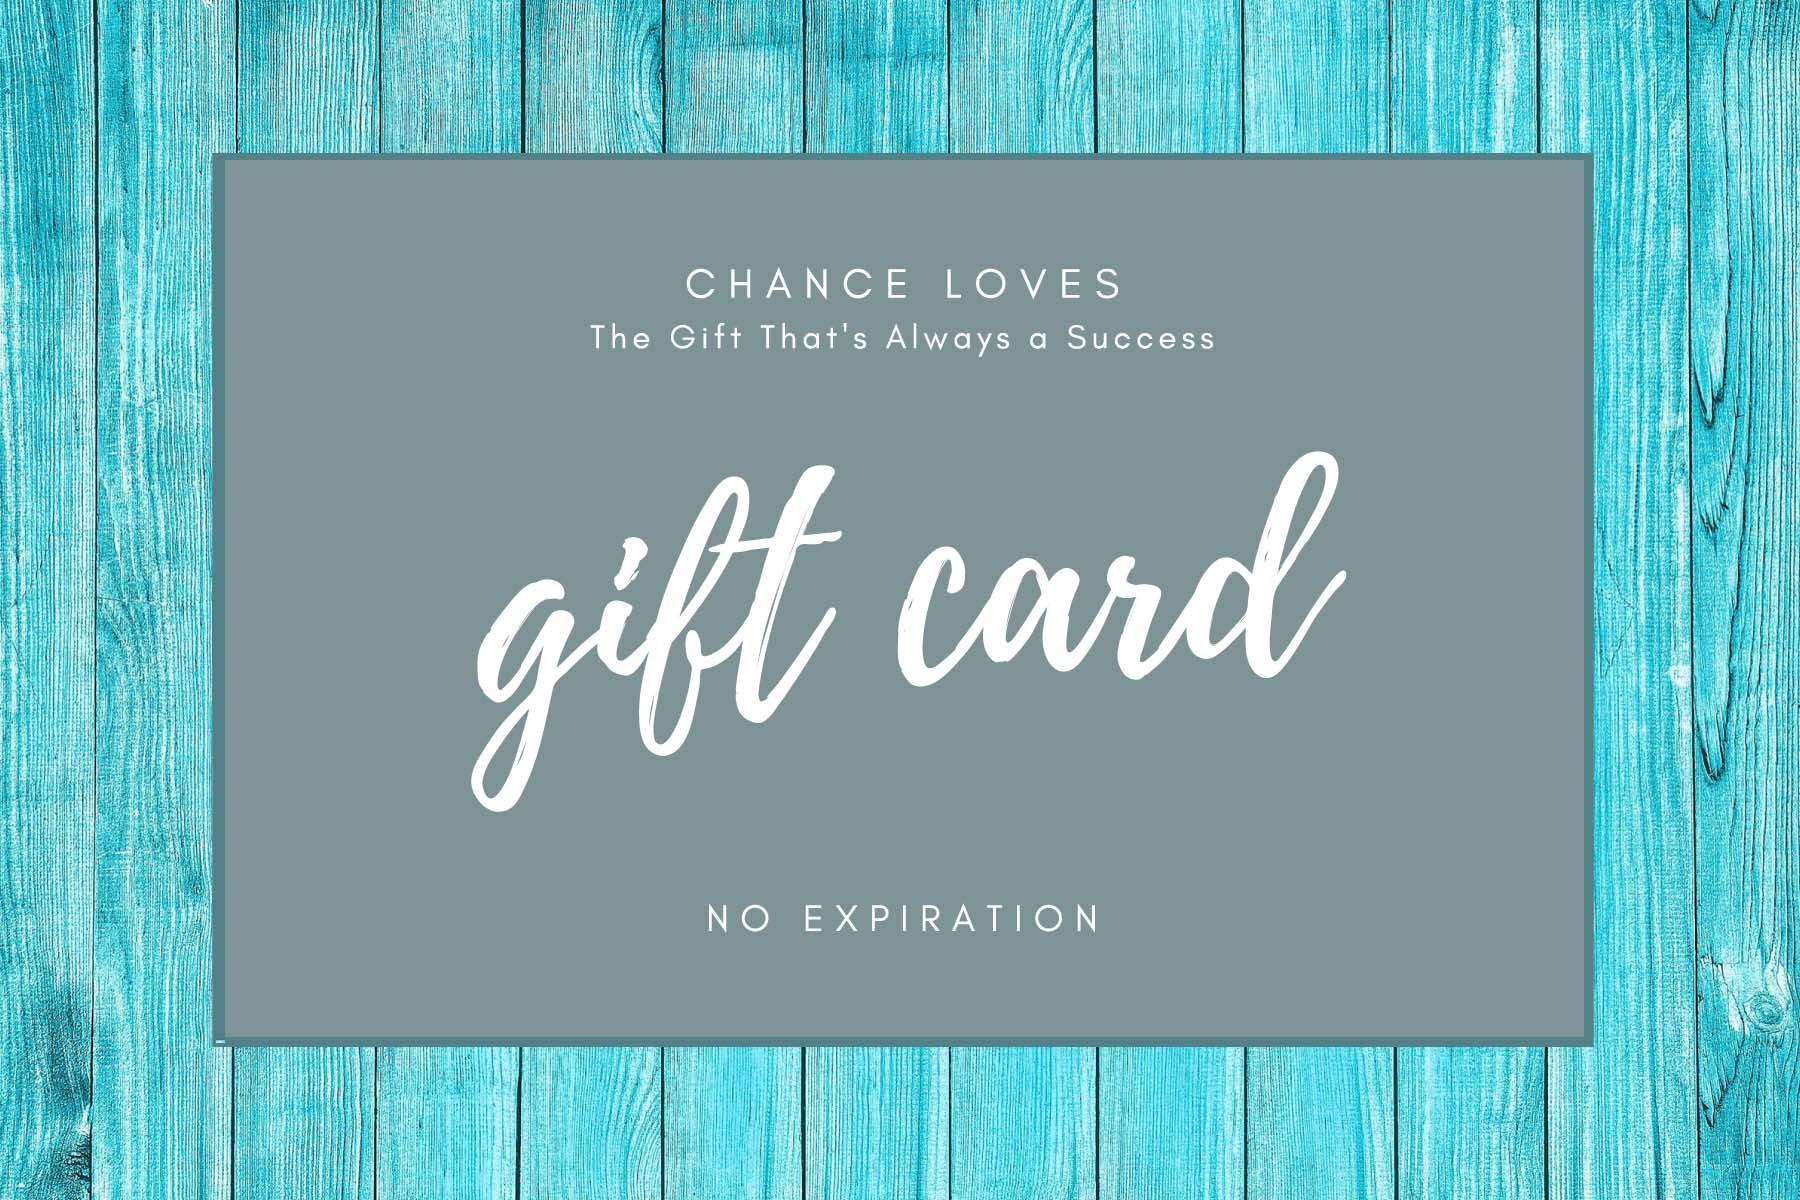 Gift Card Gift Card Chance Loves $5.00 